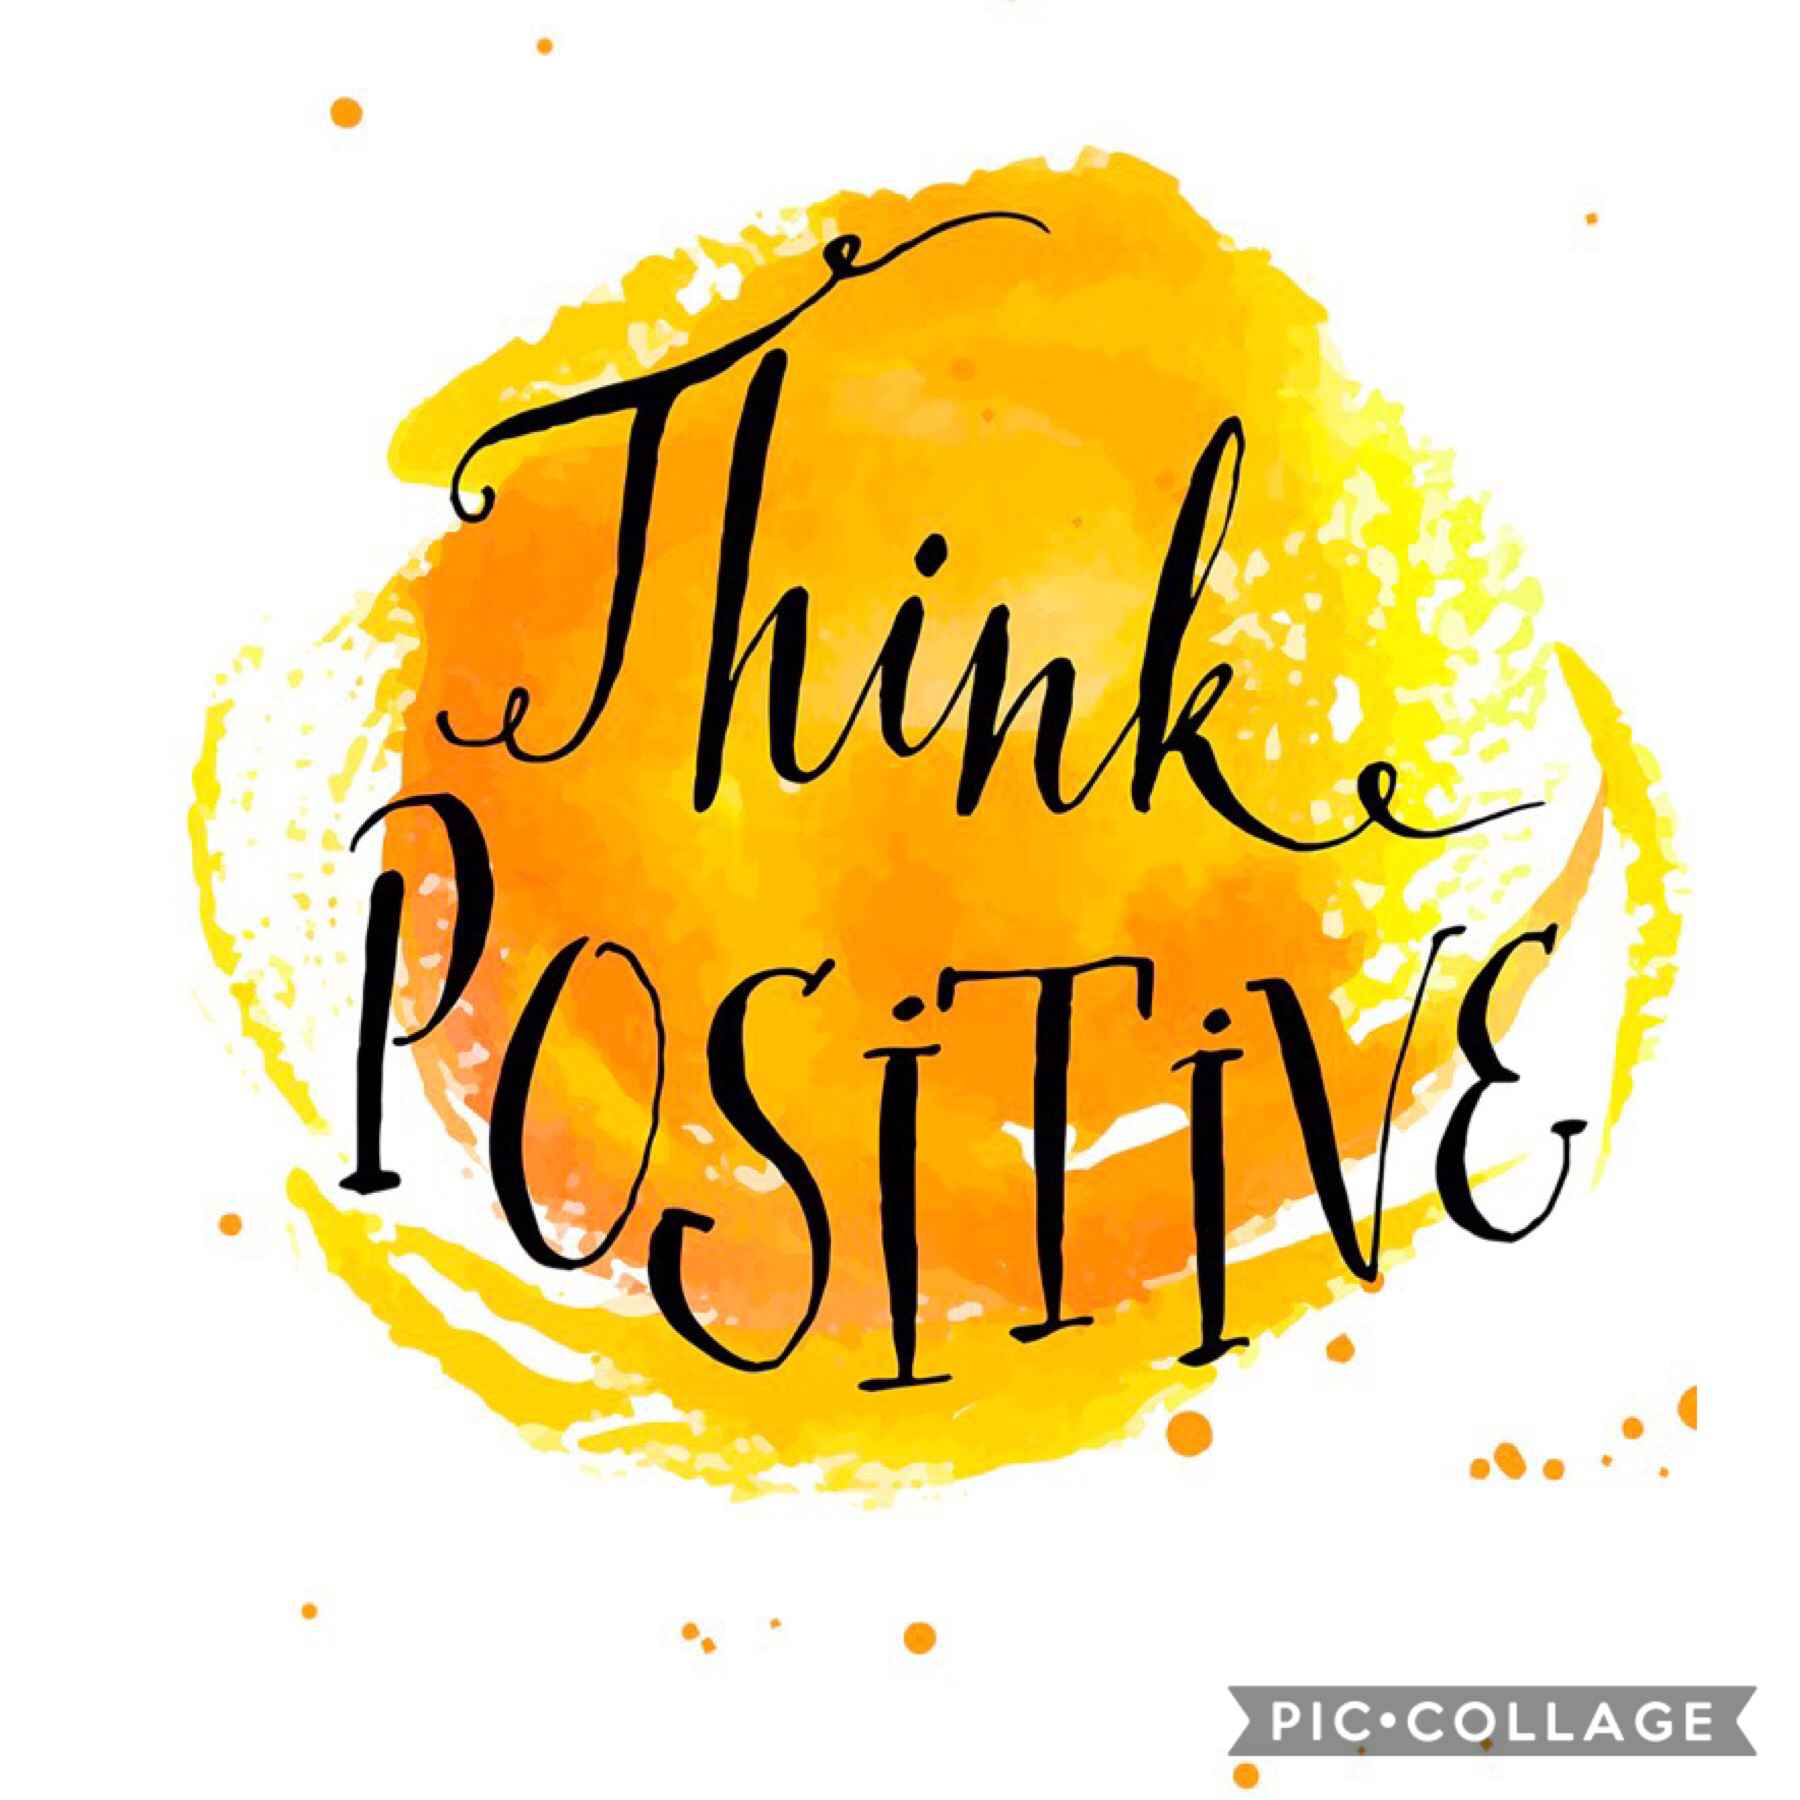 THINK POSITIVE every day !! ❤️